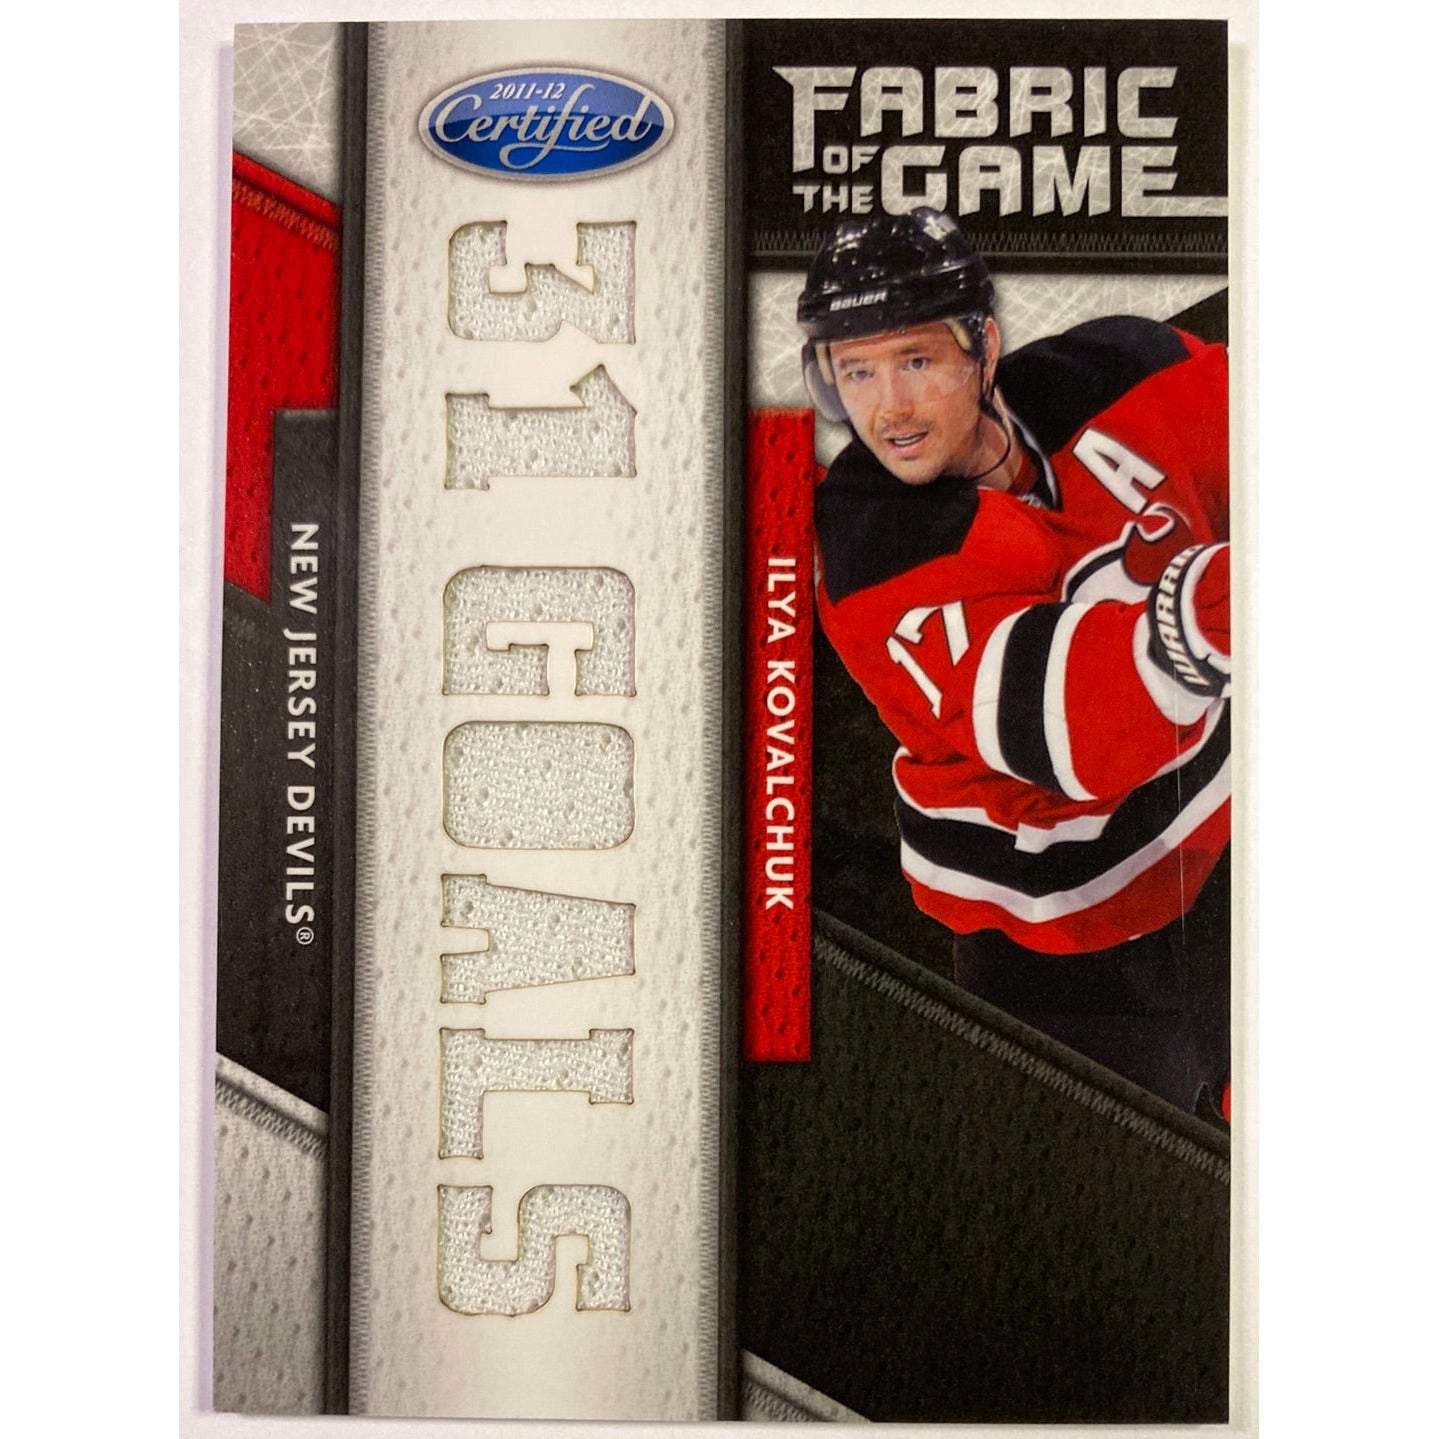  2011-12 Panini Certified Ilya Kovalchuk Fabric of the Game “31 Goals” Patch /25  Local Legends Cards & Collectibles